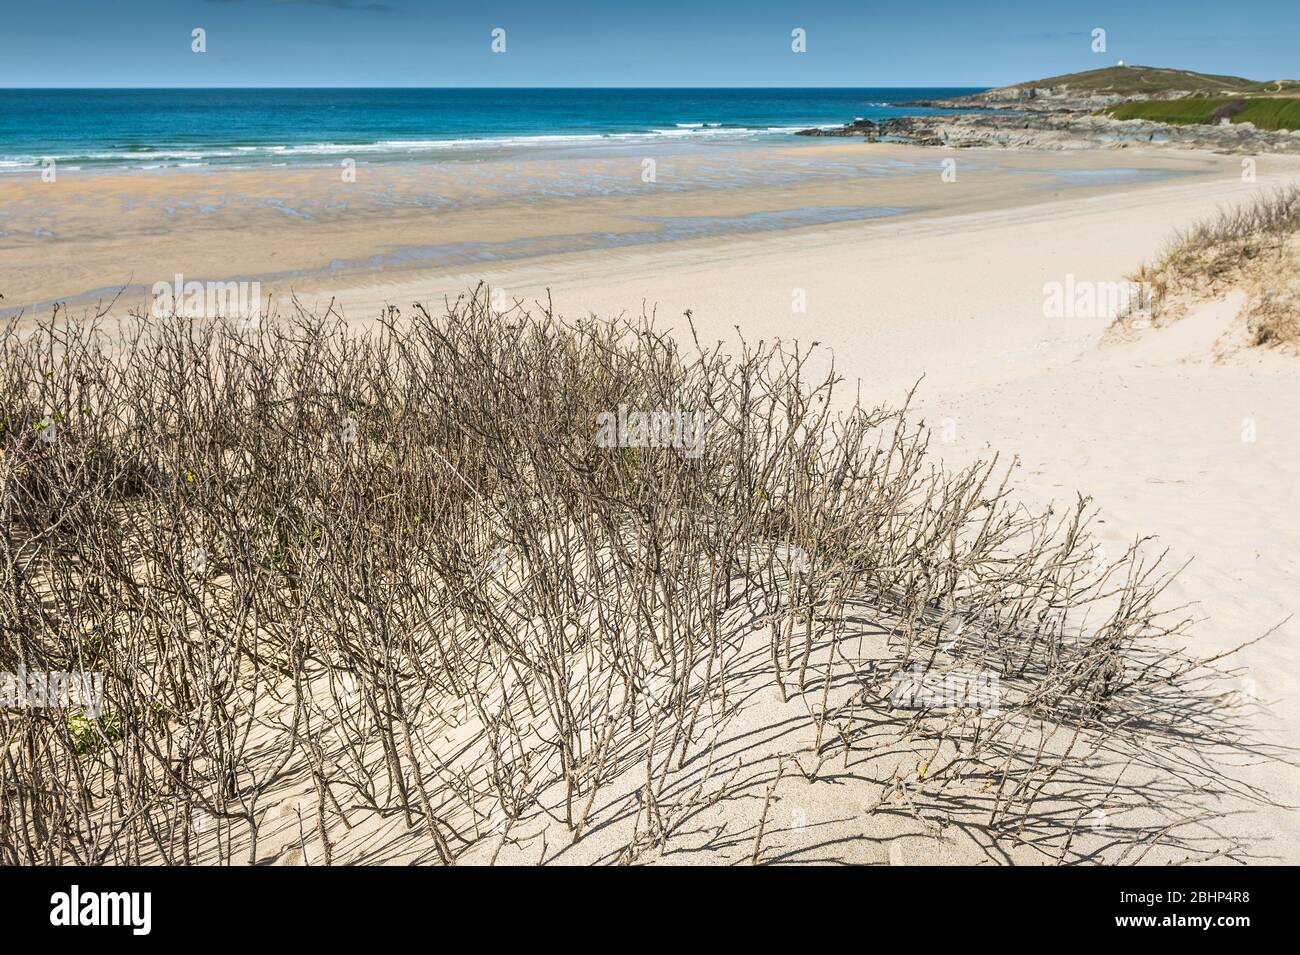 Vegetation growing on the sand dune system overlooking a totally deserted Fistral Beach in Newquay in Cornwall. Stock Photo